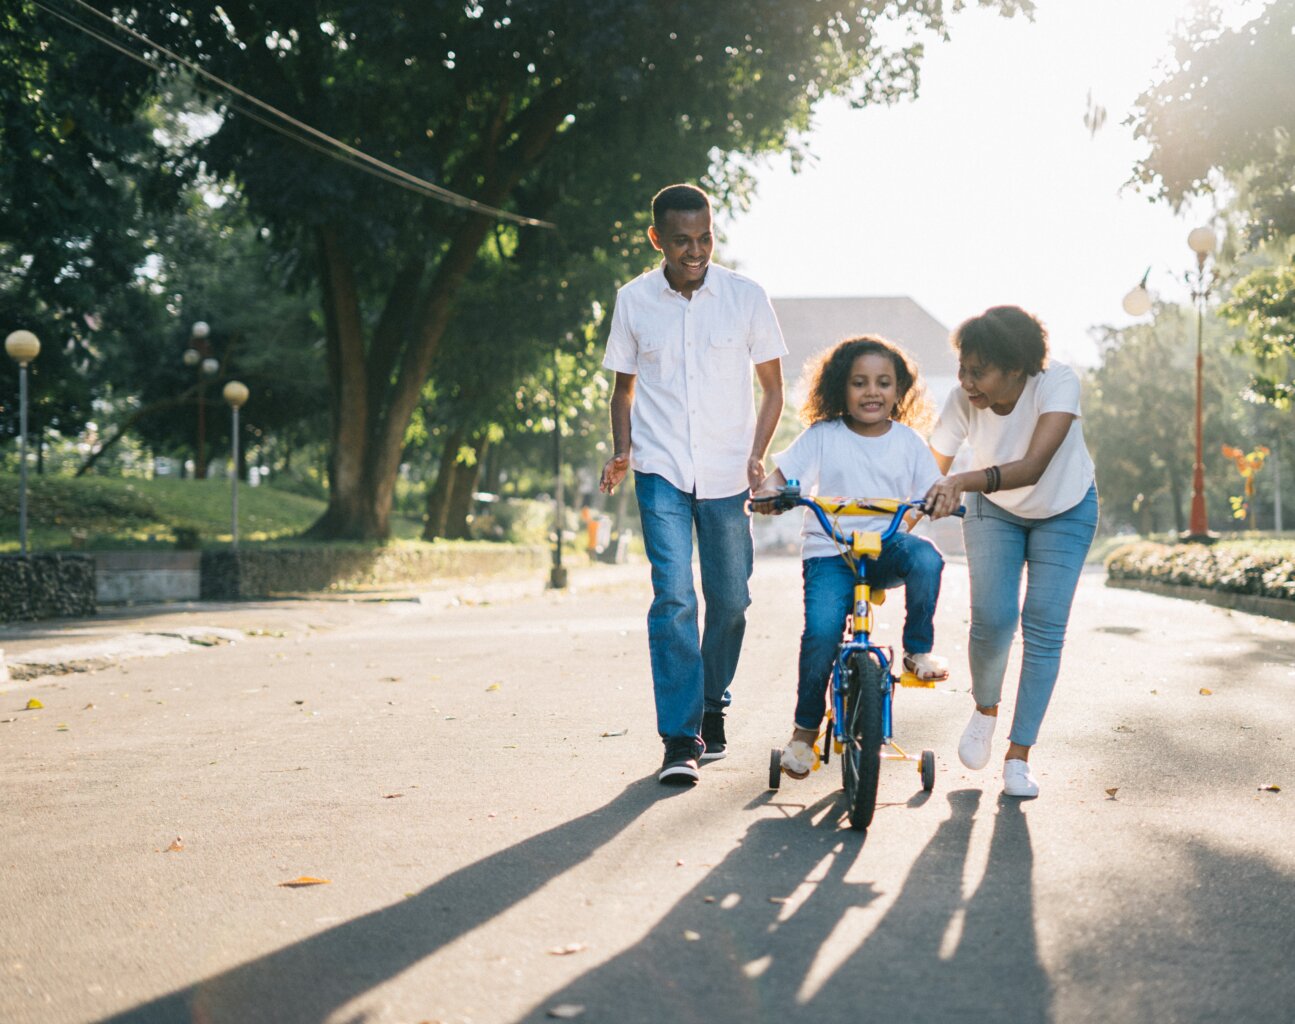 Parents, a mother and father, helping their daughter ride a bike for the first time.